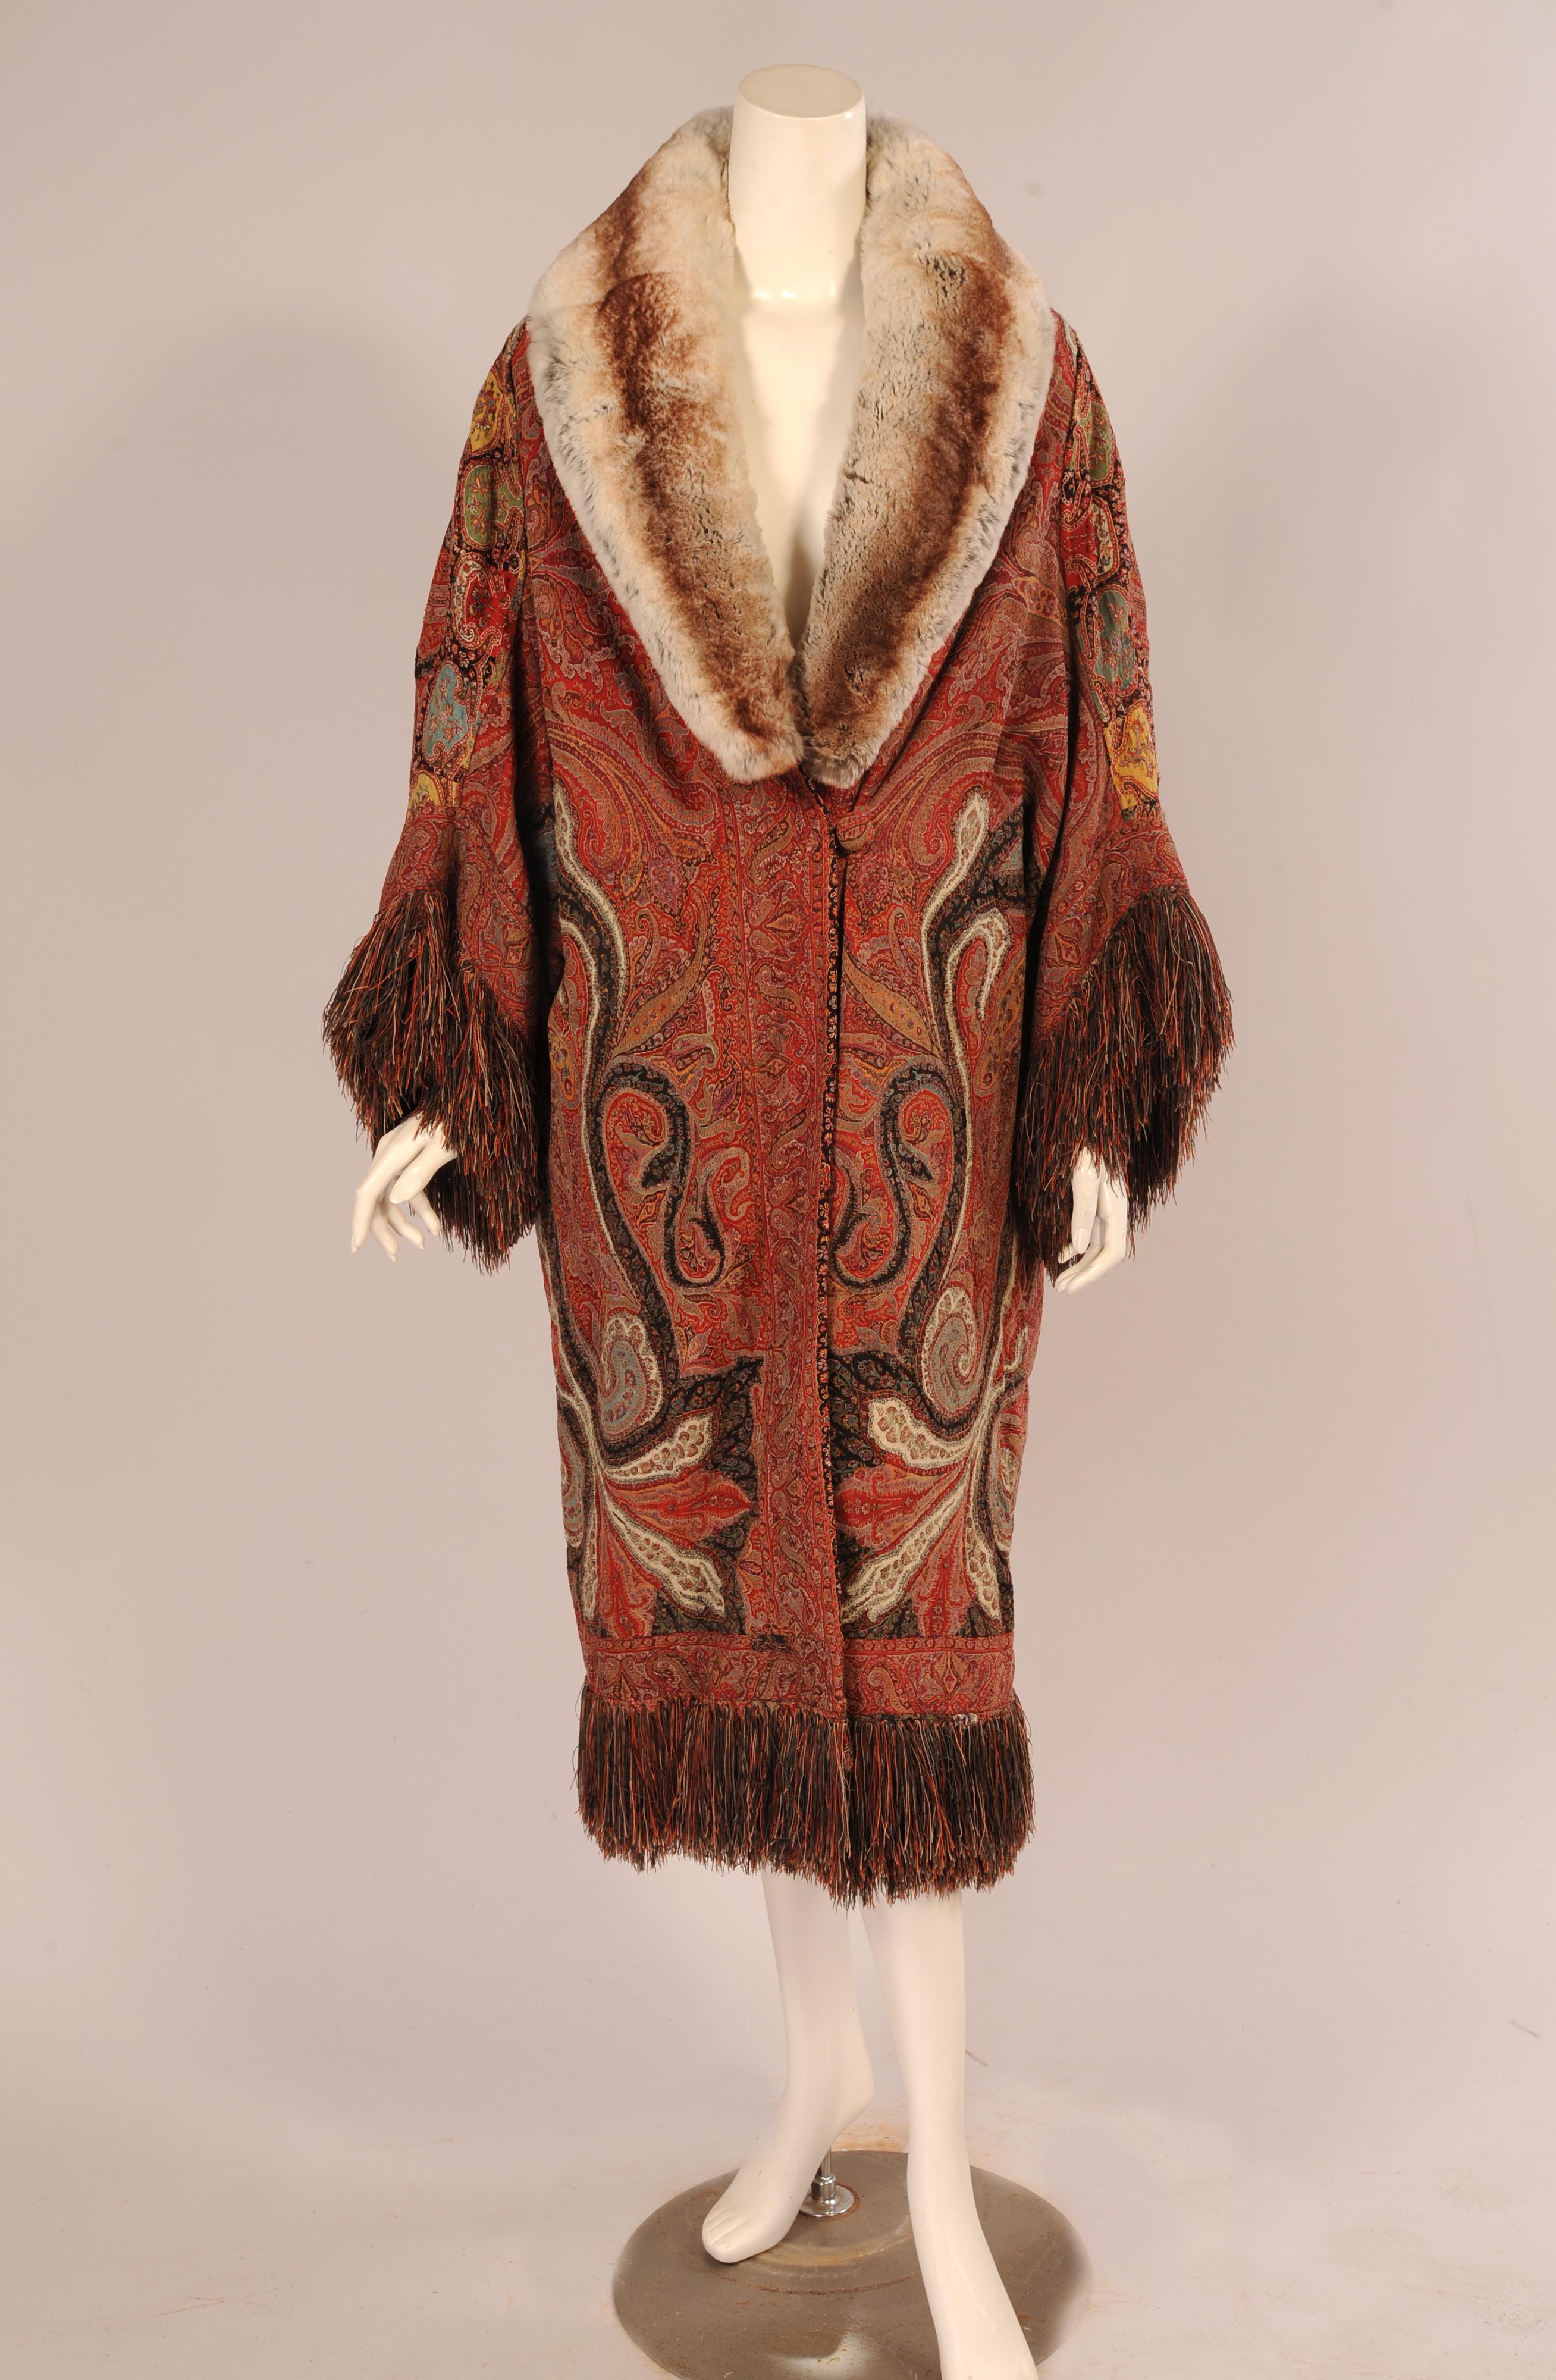 A beautiful antique handmade wool Kashmiri paisley shawl, made in India has been used to make this dramatic 1920's Coat with a chinchilla collar and multi-color silk fringe trim. The pattern has been laid out to great advantage, making the best use